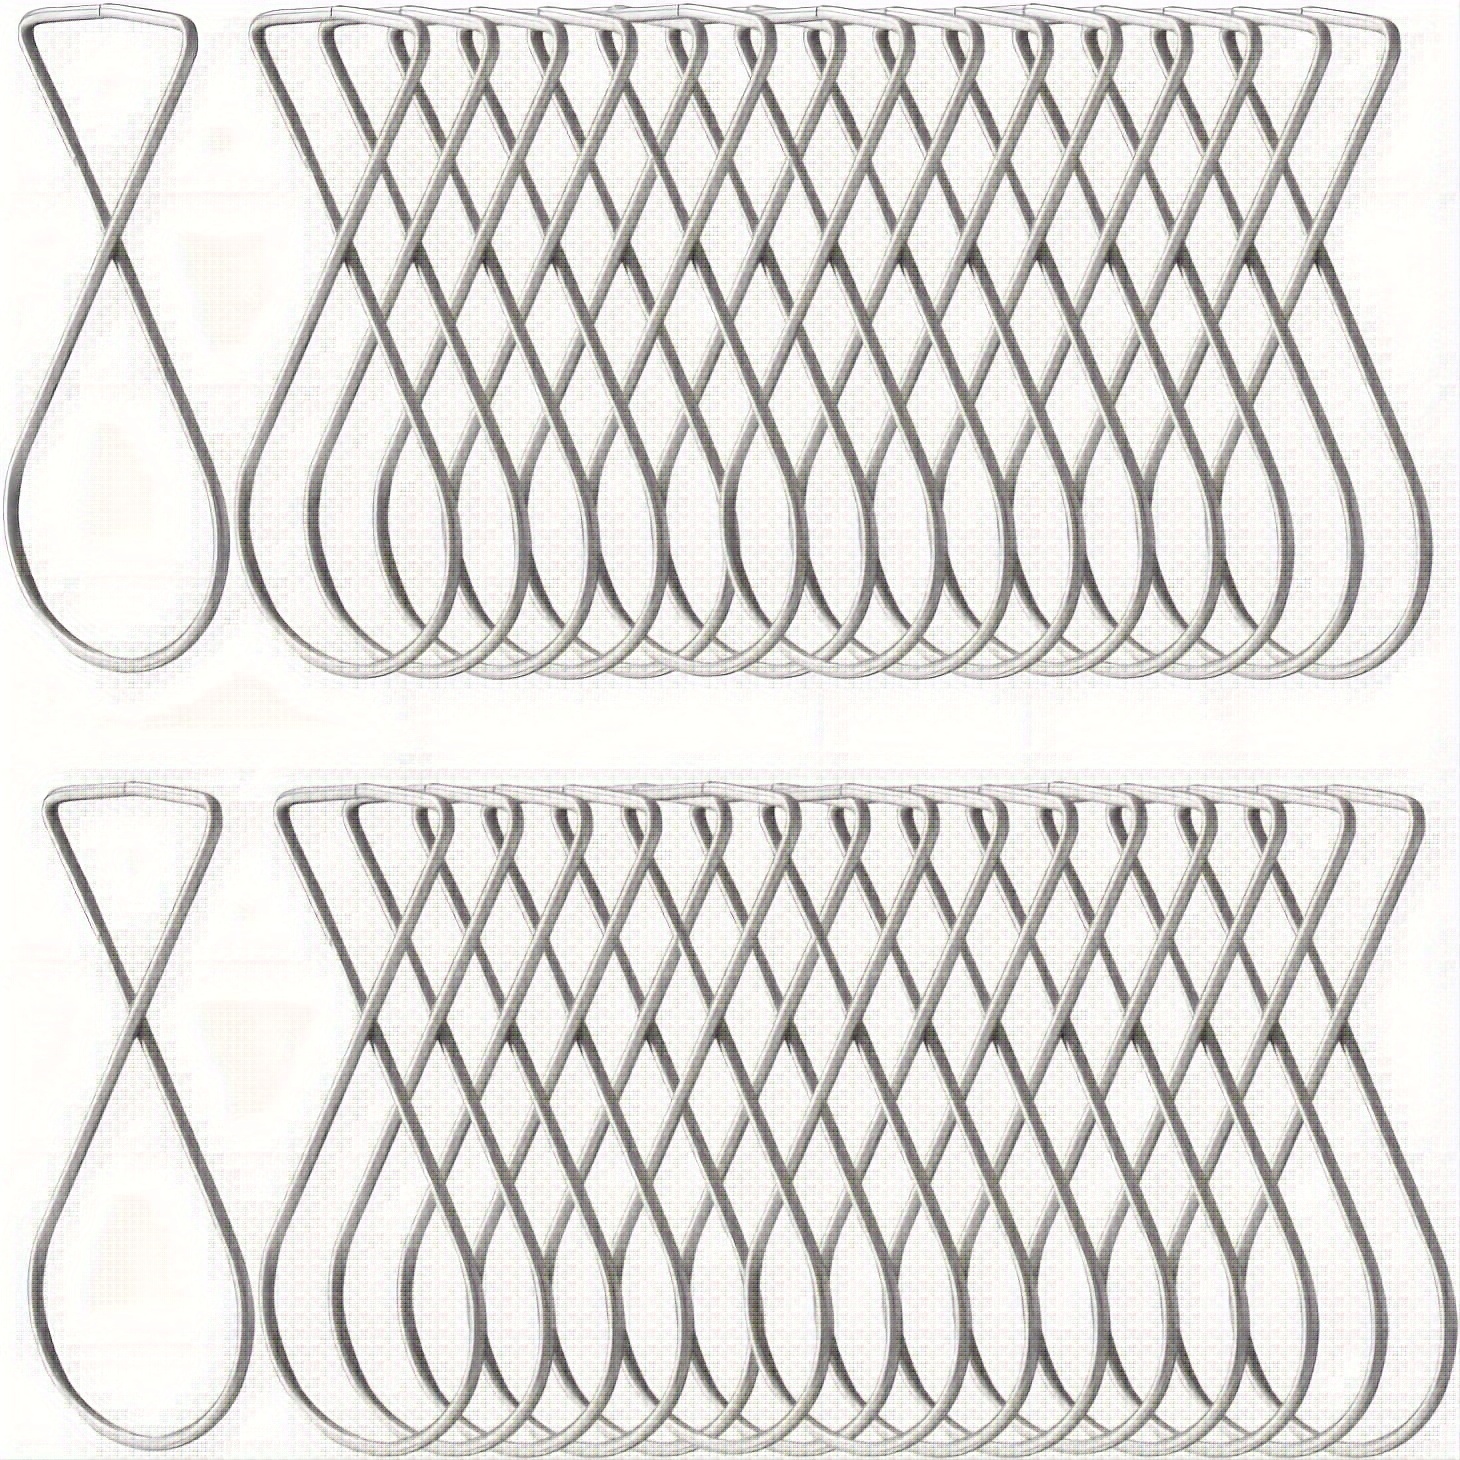 Clear Drop Ceiling Hooks Classroom Decorations - 12 Pack Polycarbonate  Ceiling Hanger Hooks For Hanging T-Bar Track Clip On Suspended Ceiling Tile